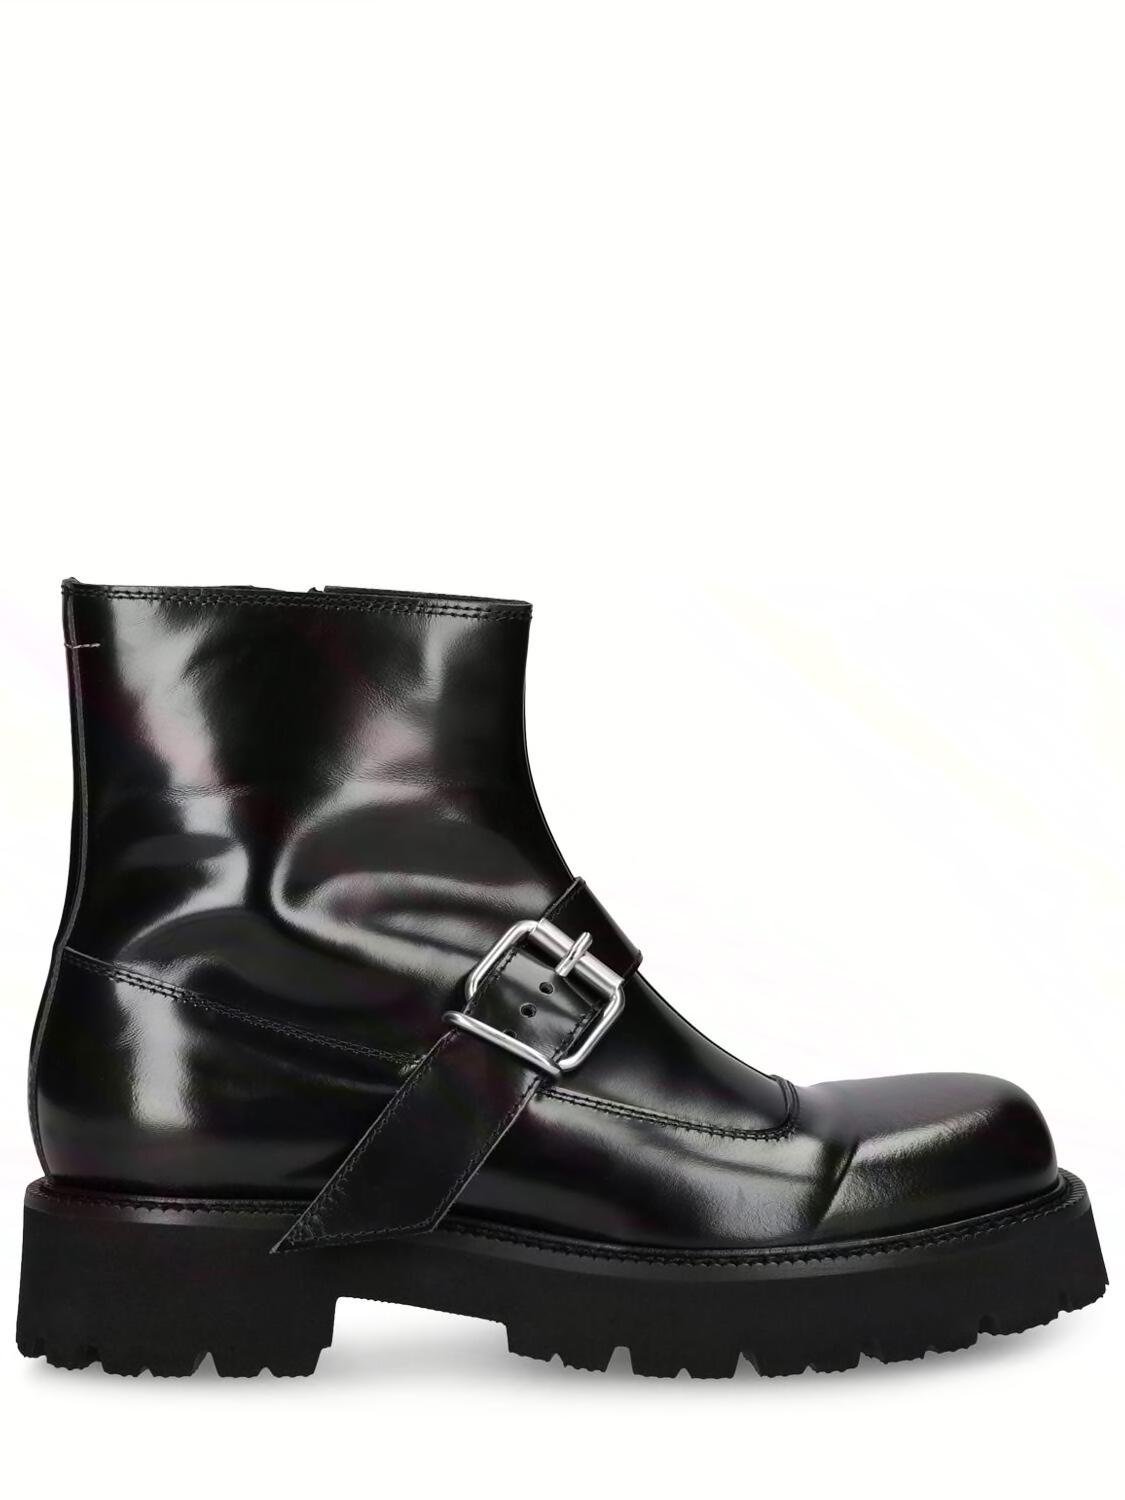 Polished Leather Combat Boots by MM6 MAISON MARGIELA